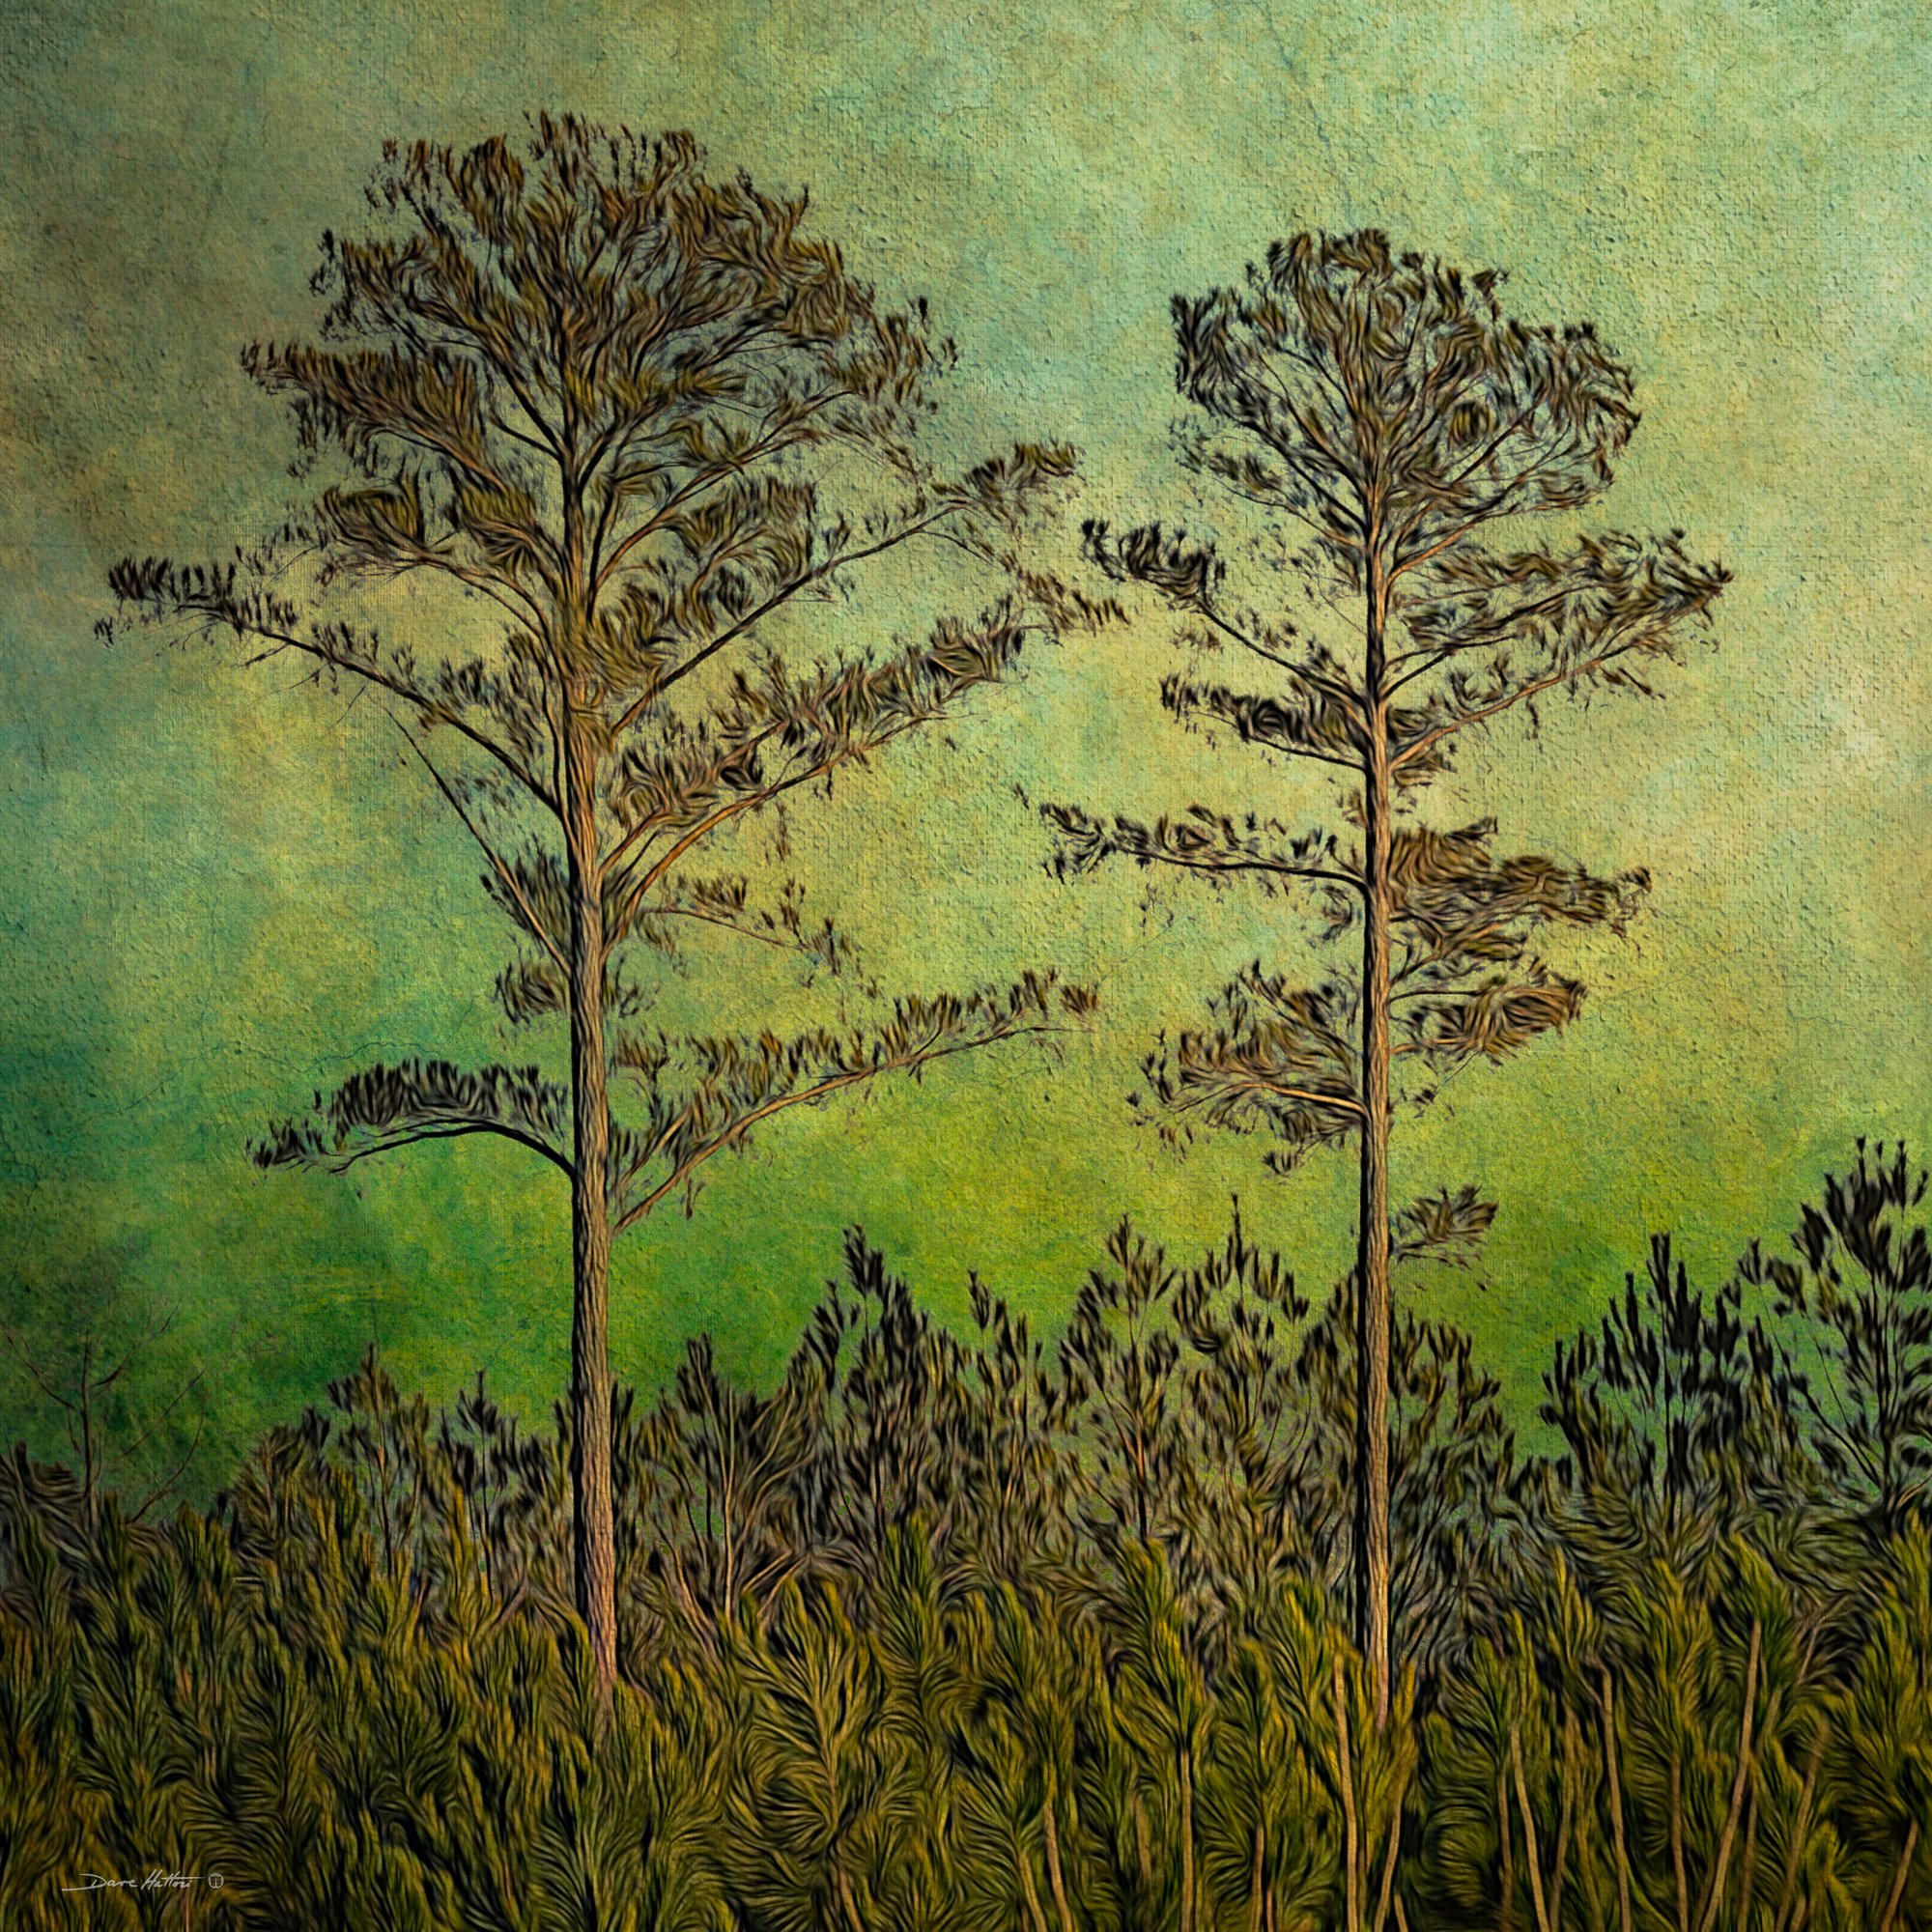 "Two Pines"